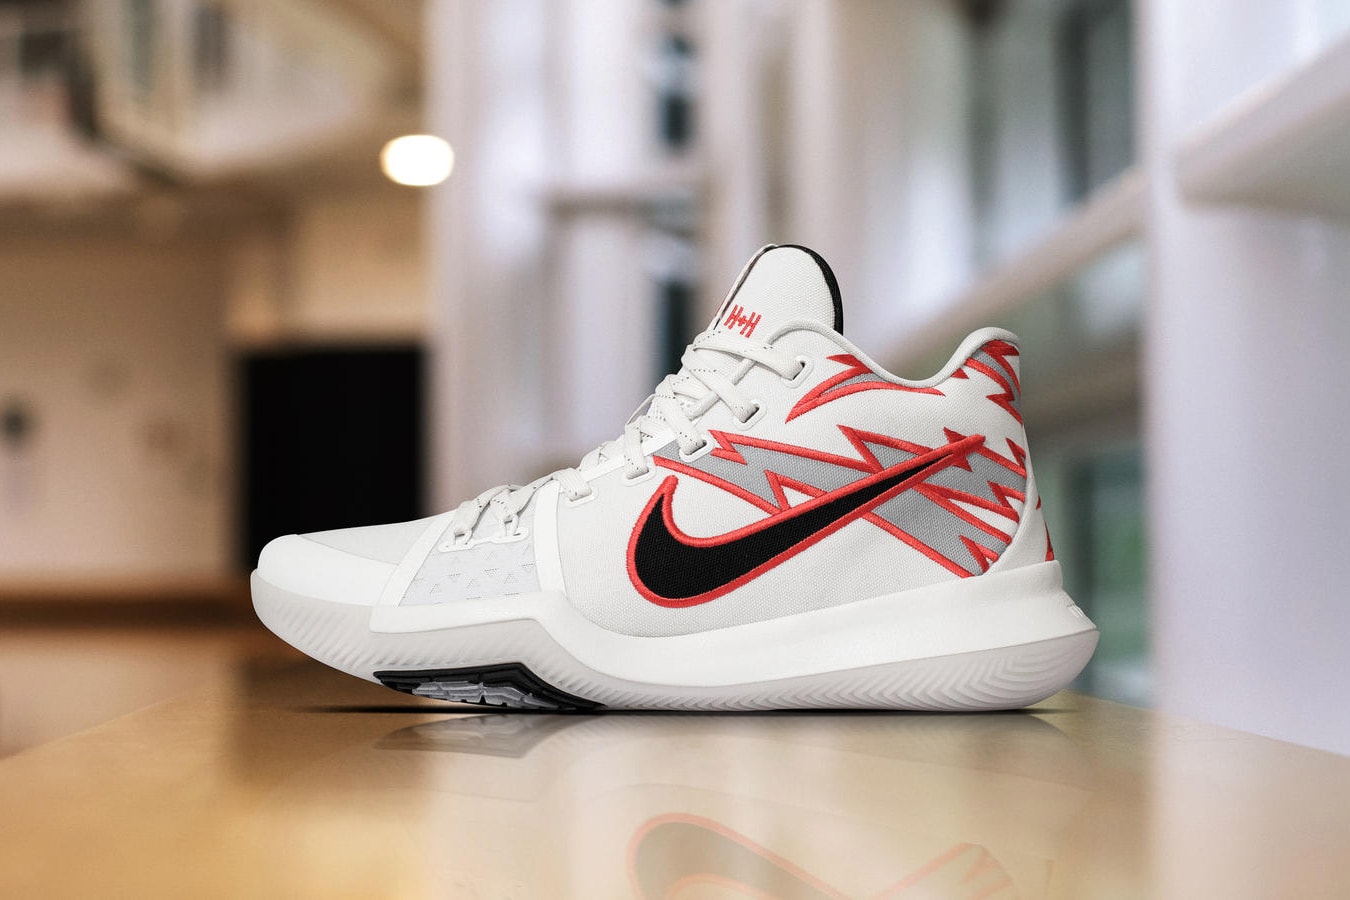 Nike Kyrie 3 PE Lightning Bolts White Grease